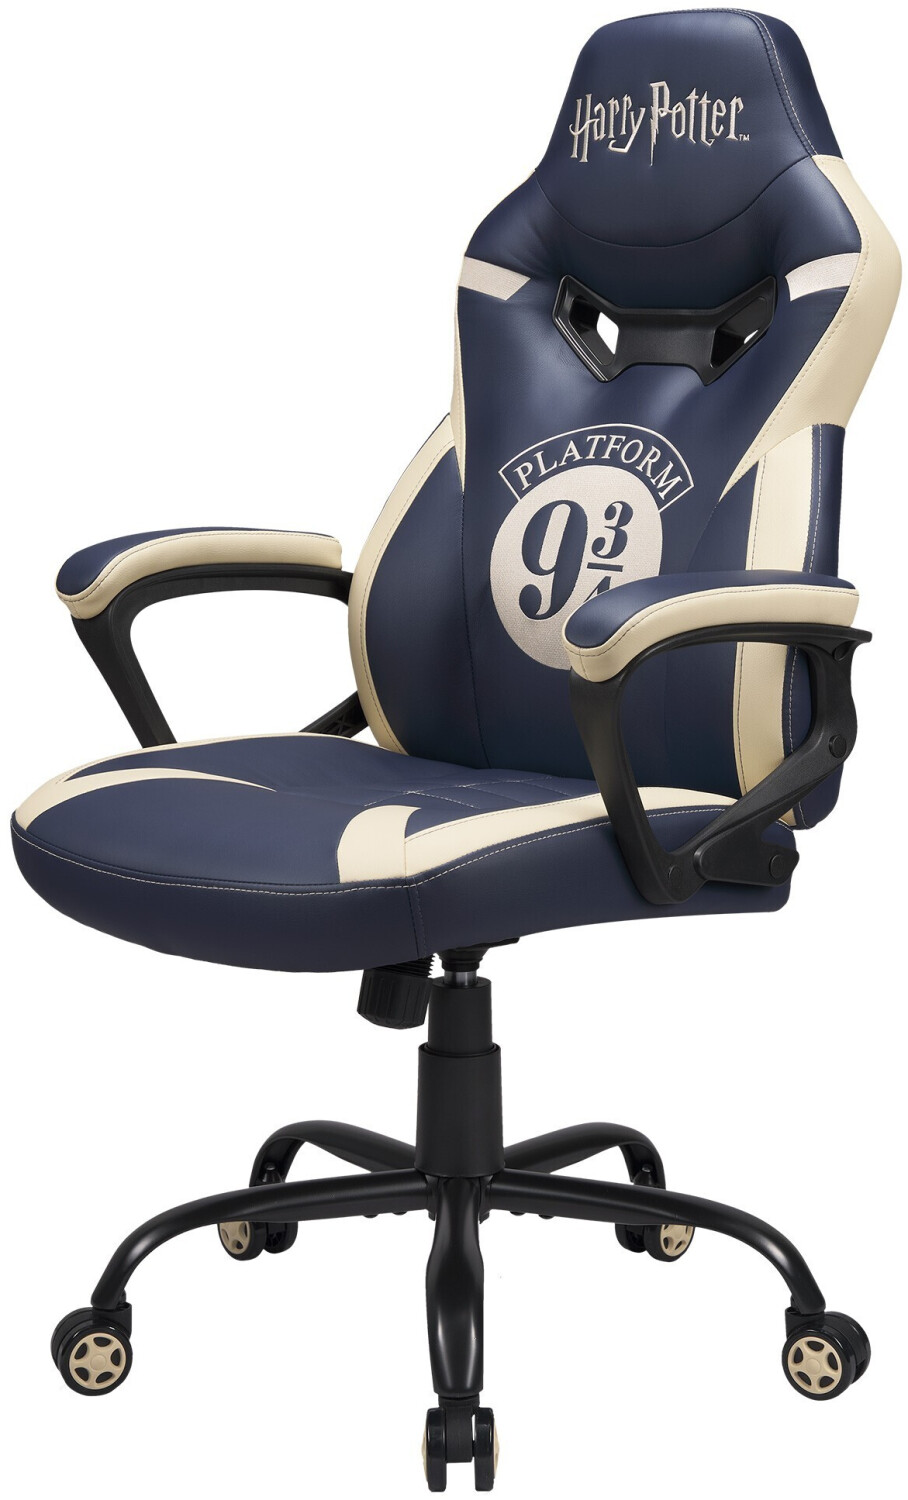 SuBsonic Harry Potter - Junior Gaming Chair - 9 3/4